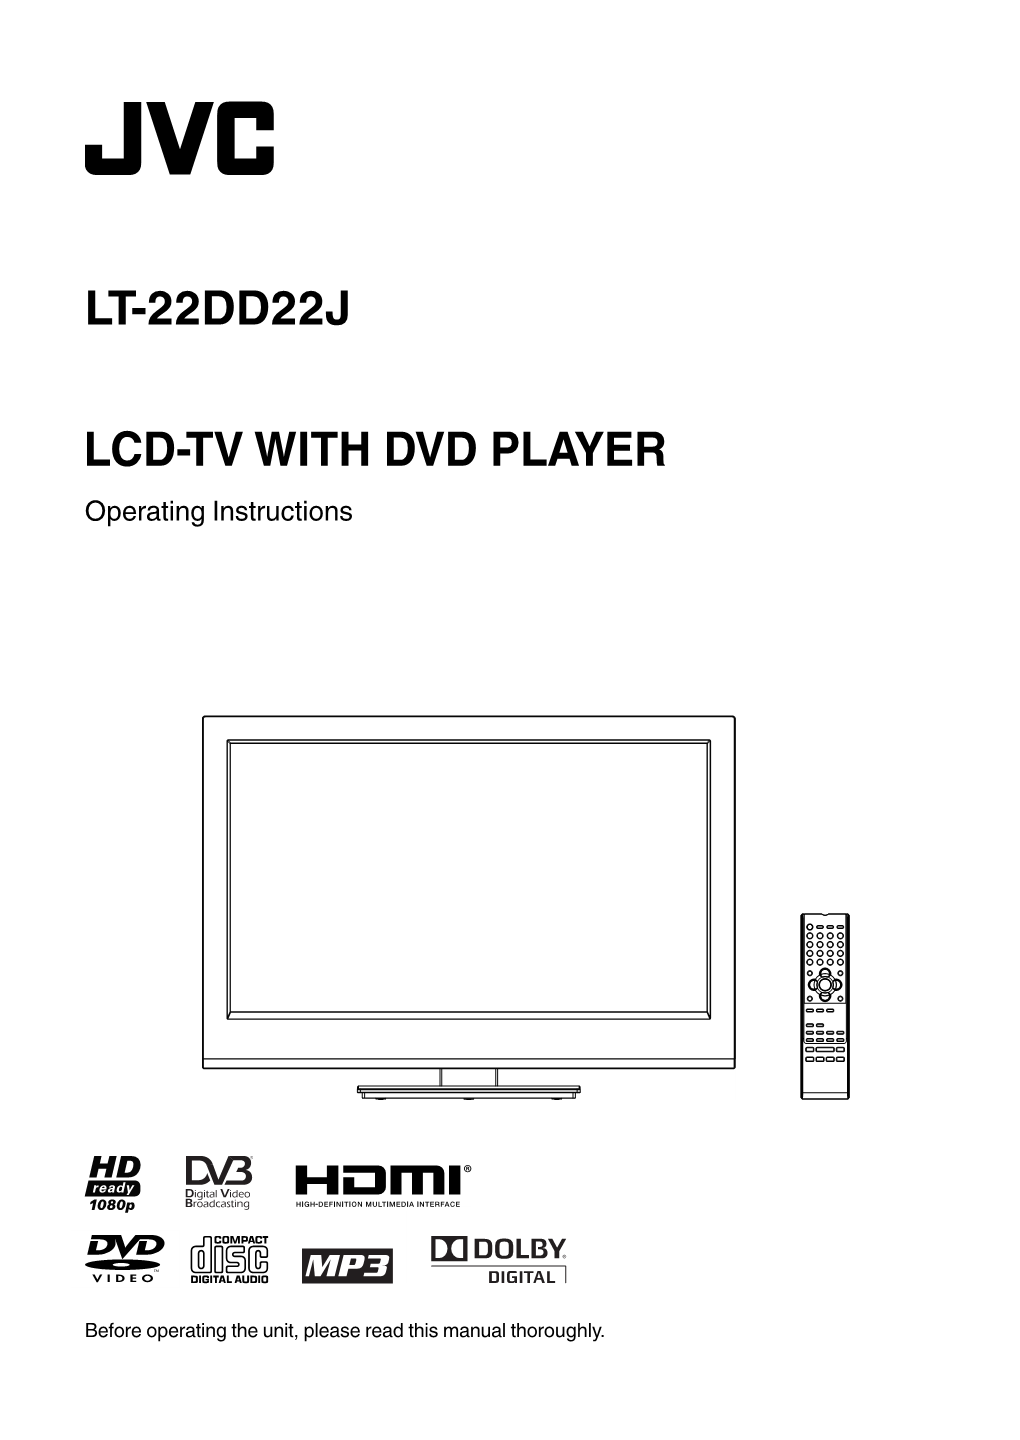 Lcd-Tv with Dvd Player Lt-22Dd22j